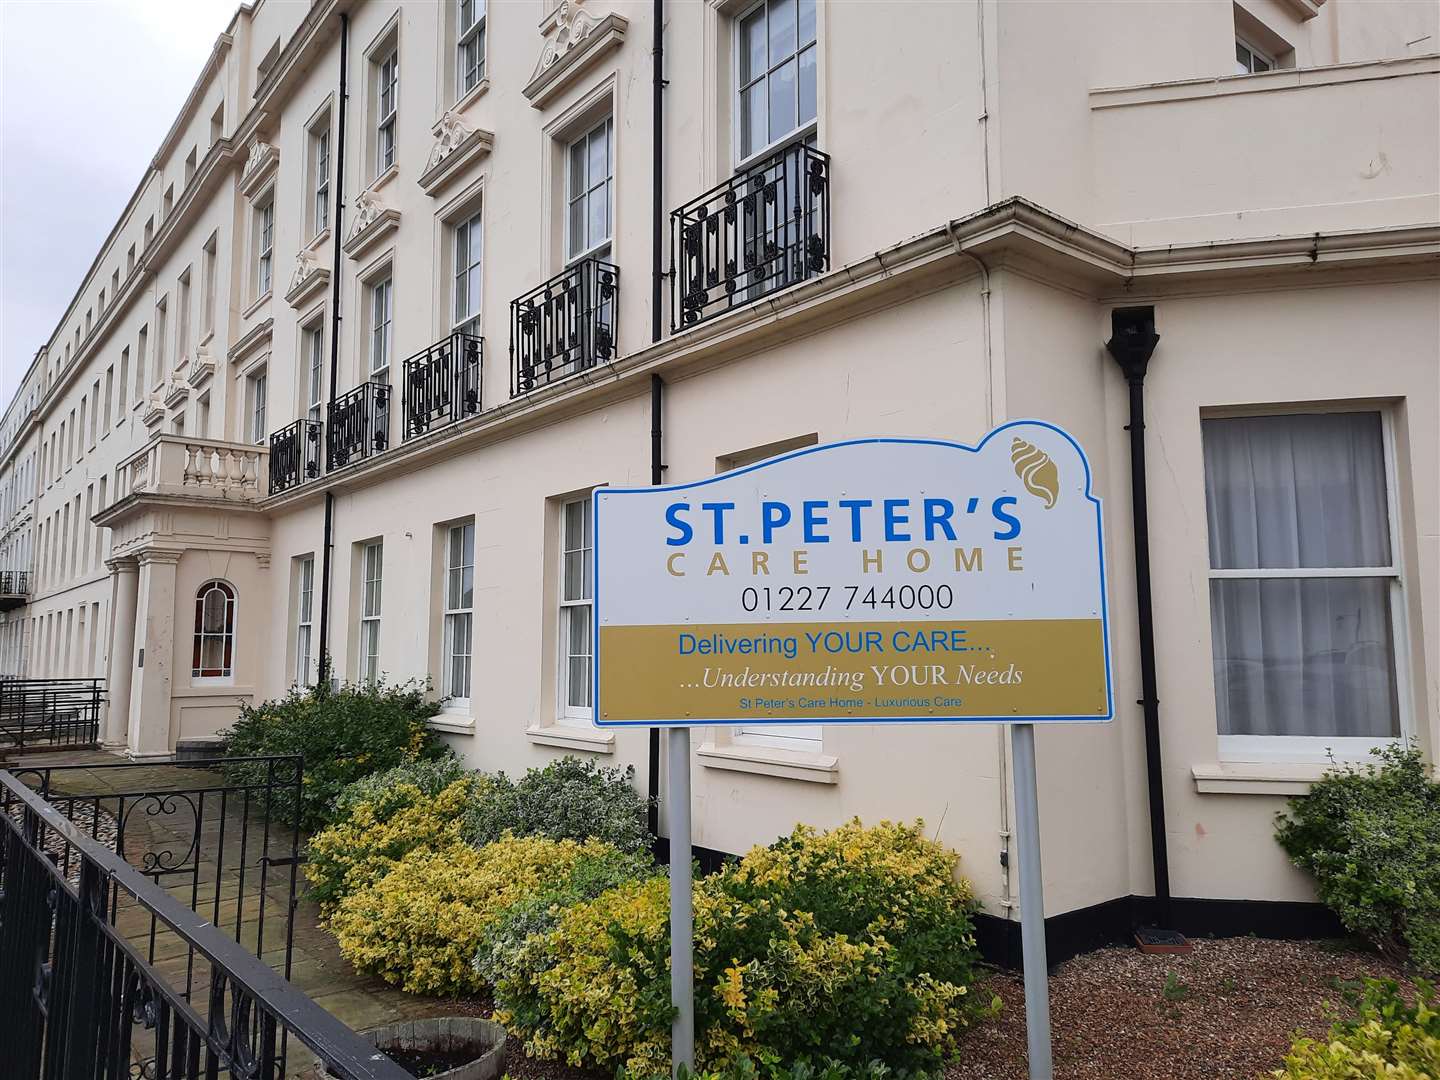 Bosses from St Peter's care home in Herne Bay say they are working with the Care Quality Commission to address their concerns